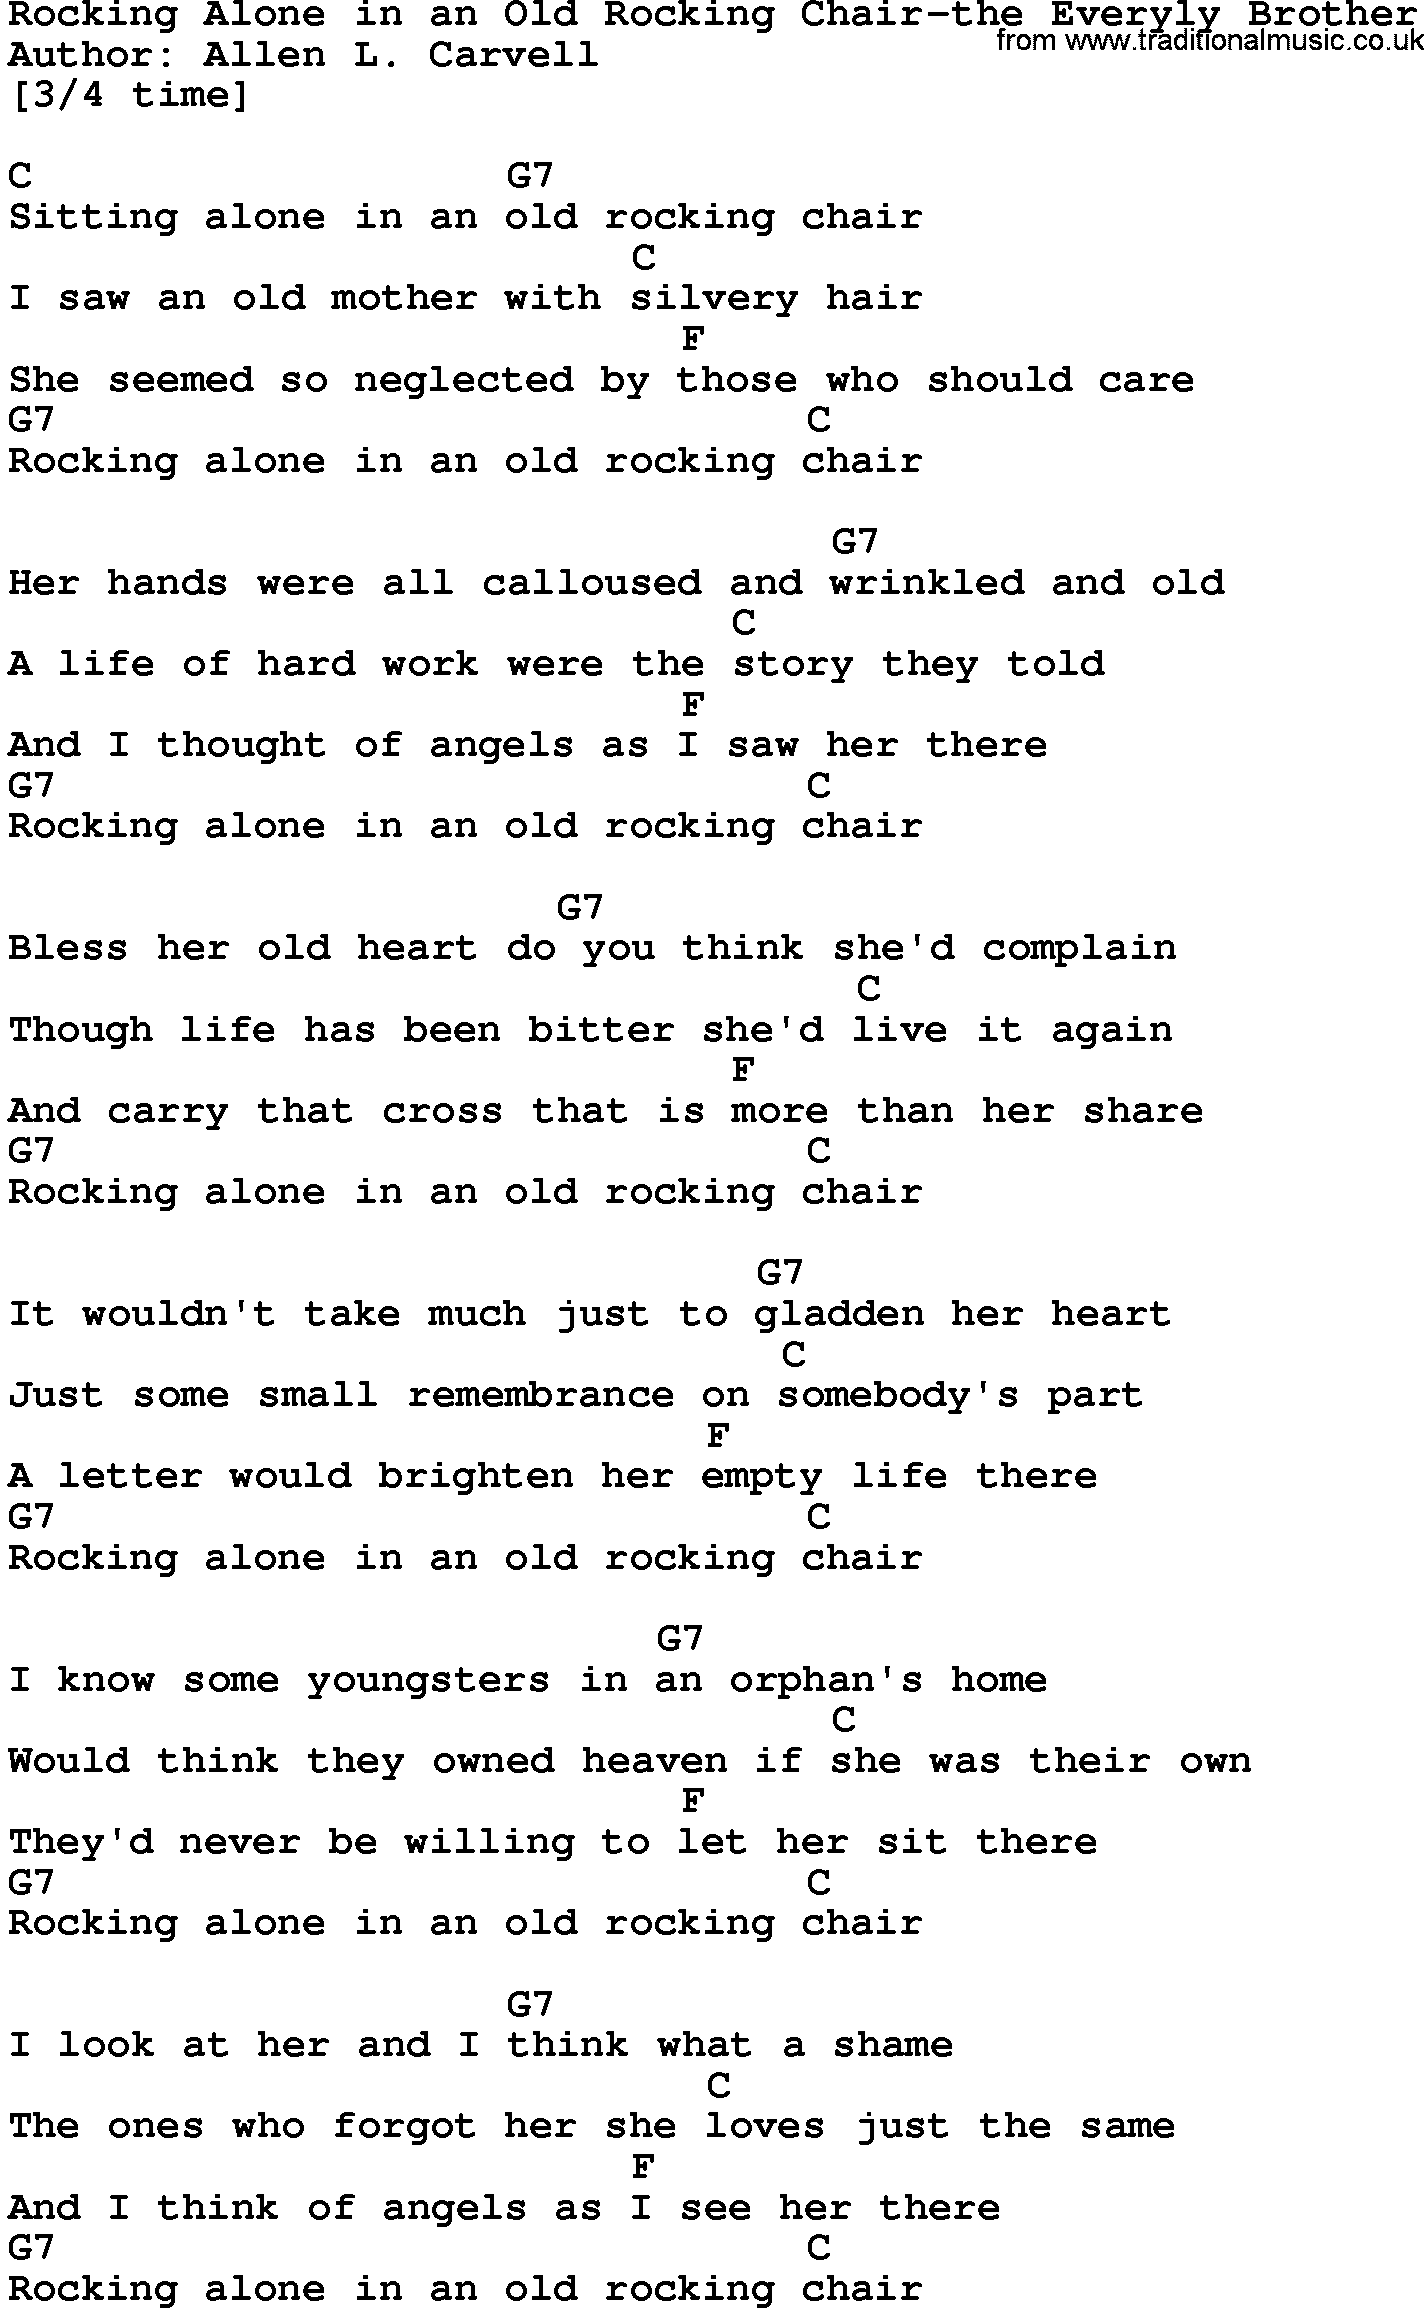 Country music song: Rocking Alone In An Old Rocking Chair-The Everyly Brother lyrics and chords